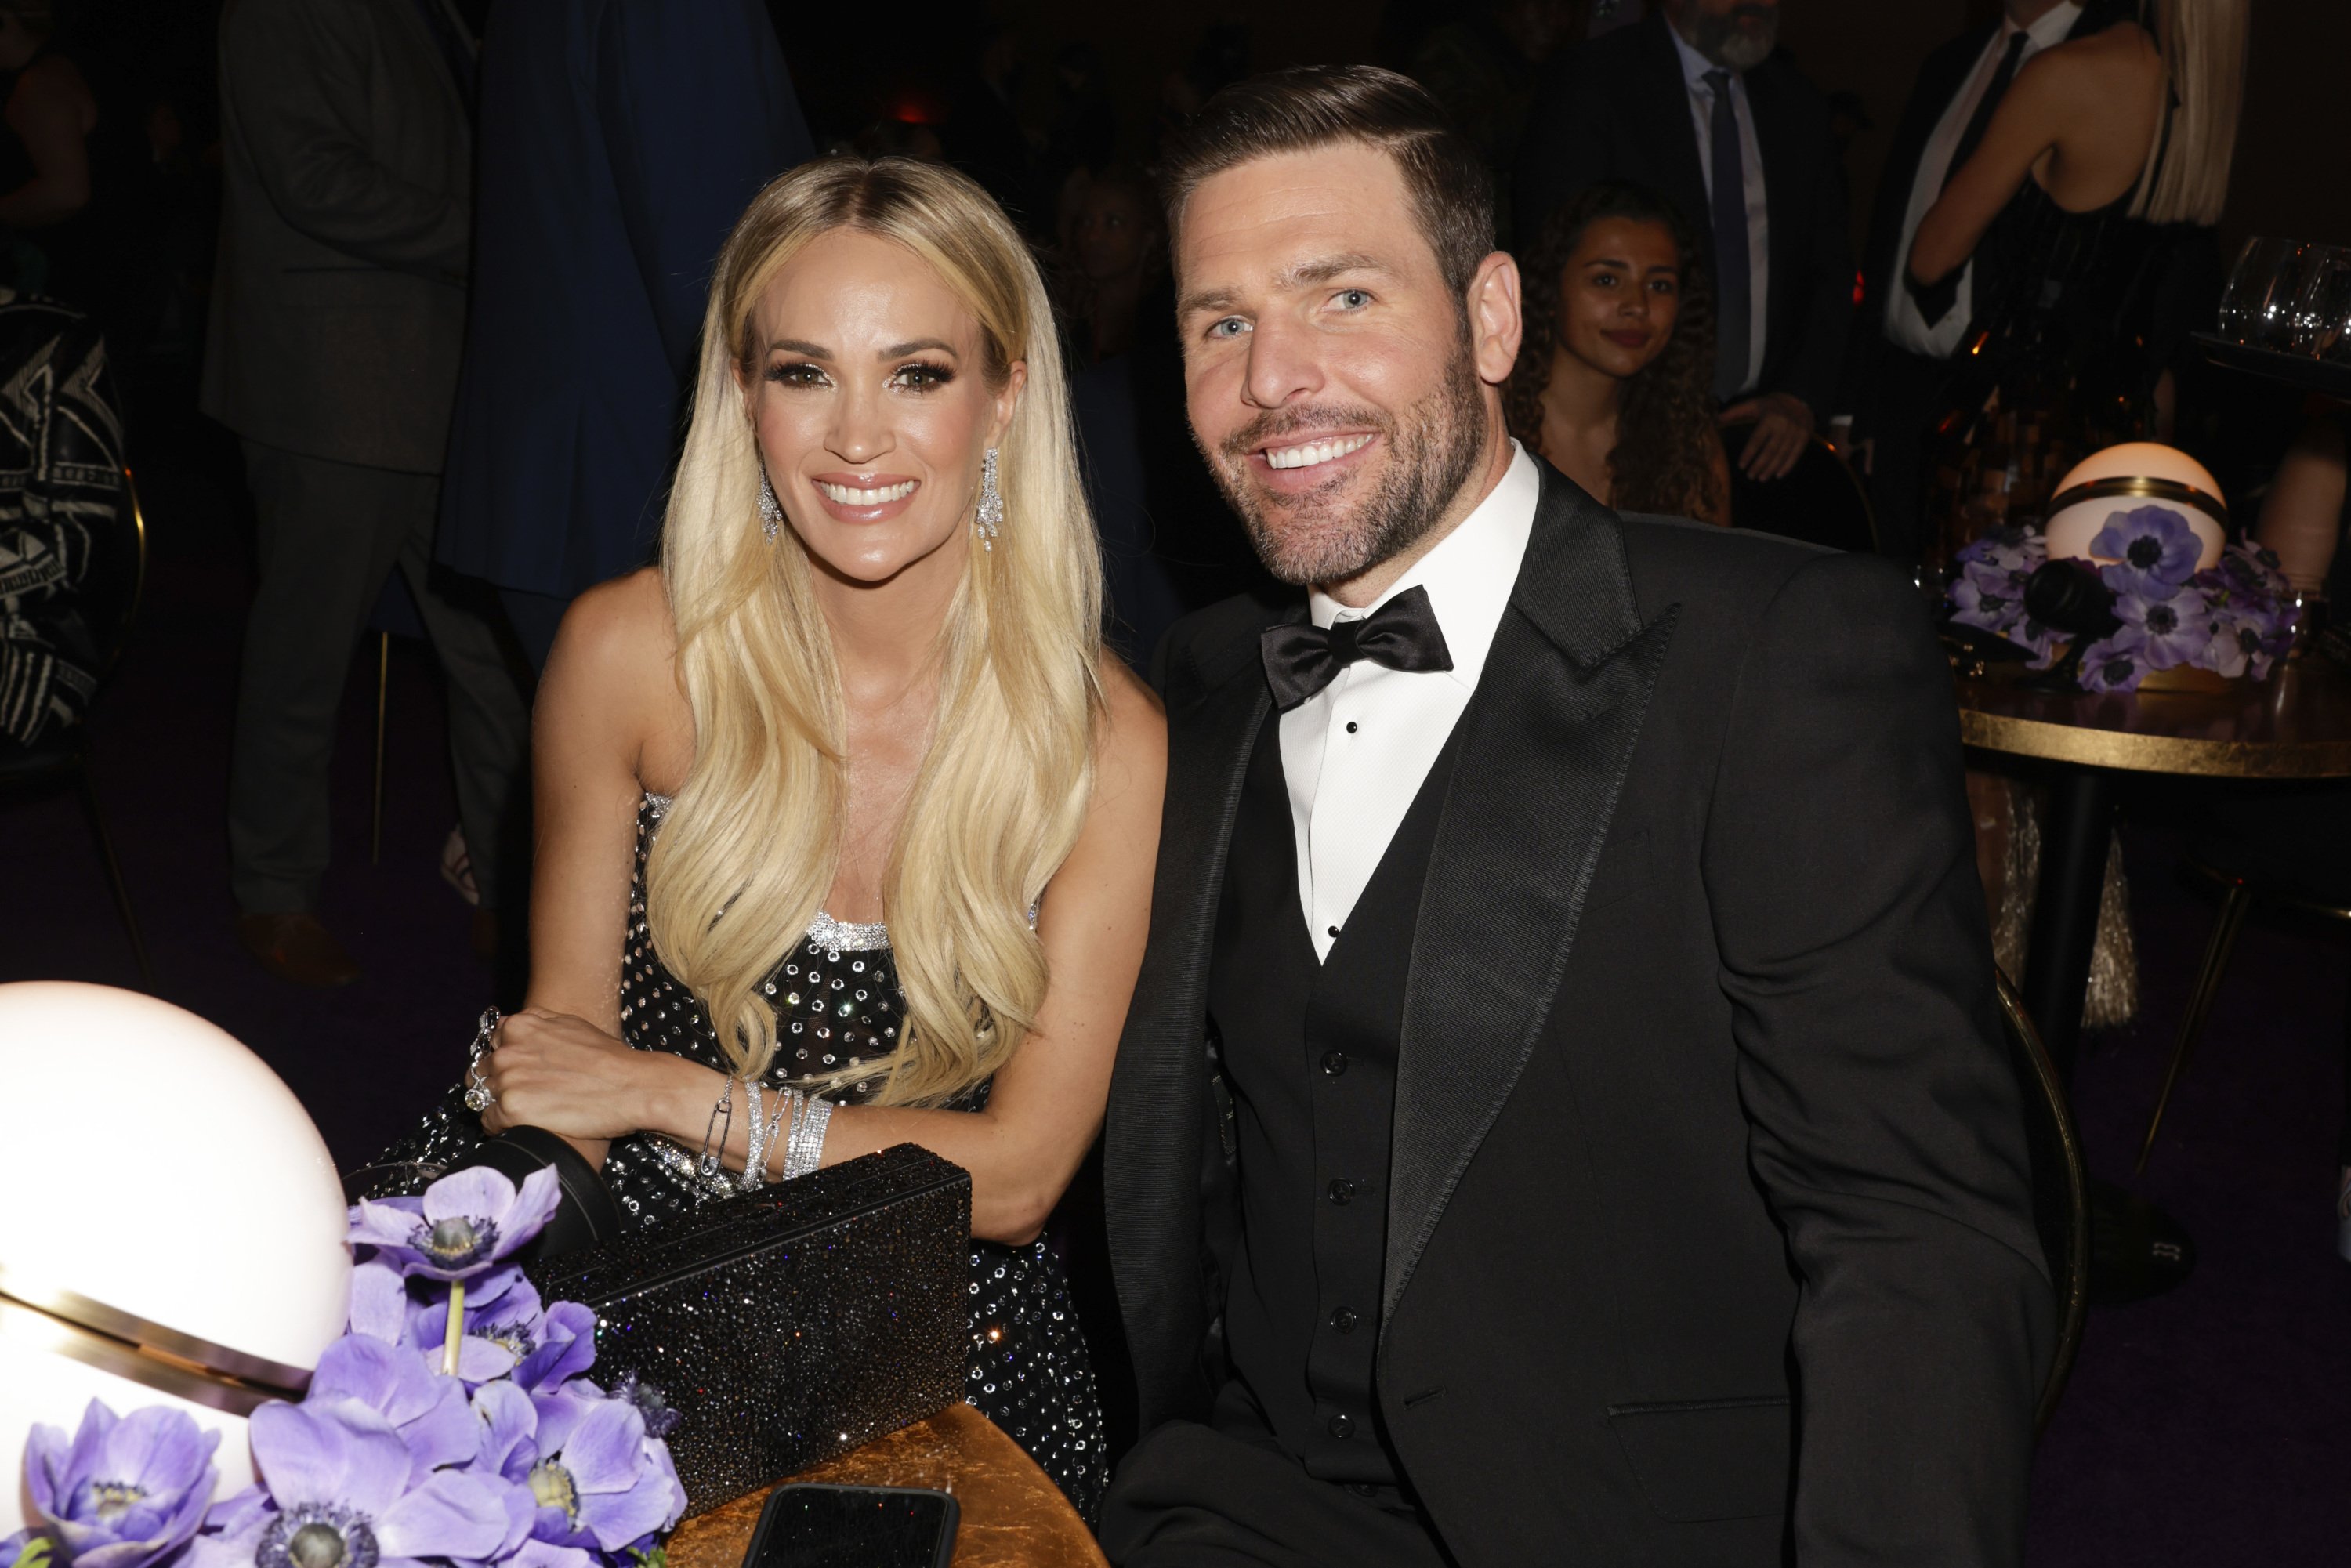 Carrie Underwood and Mike Fisher at the 64th annual Grammy Awards in Las Vegas on April 3, 2022 | Source: Getty Images